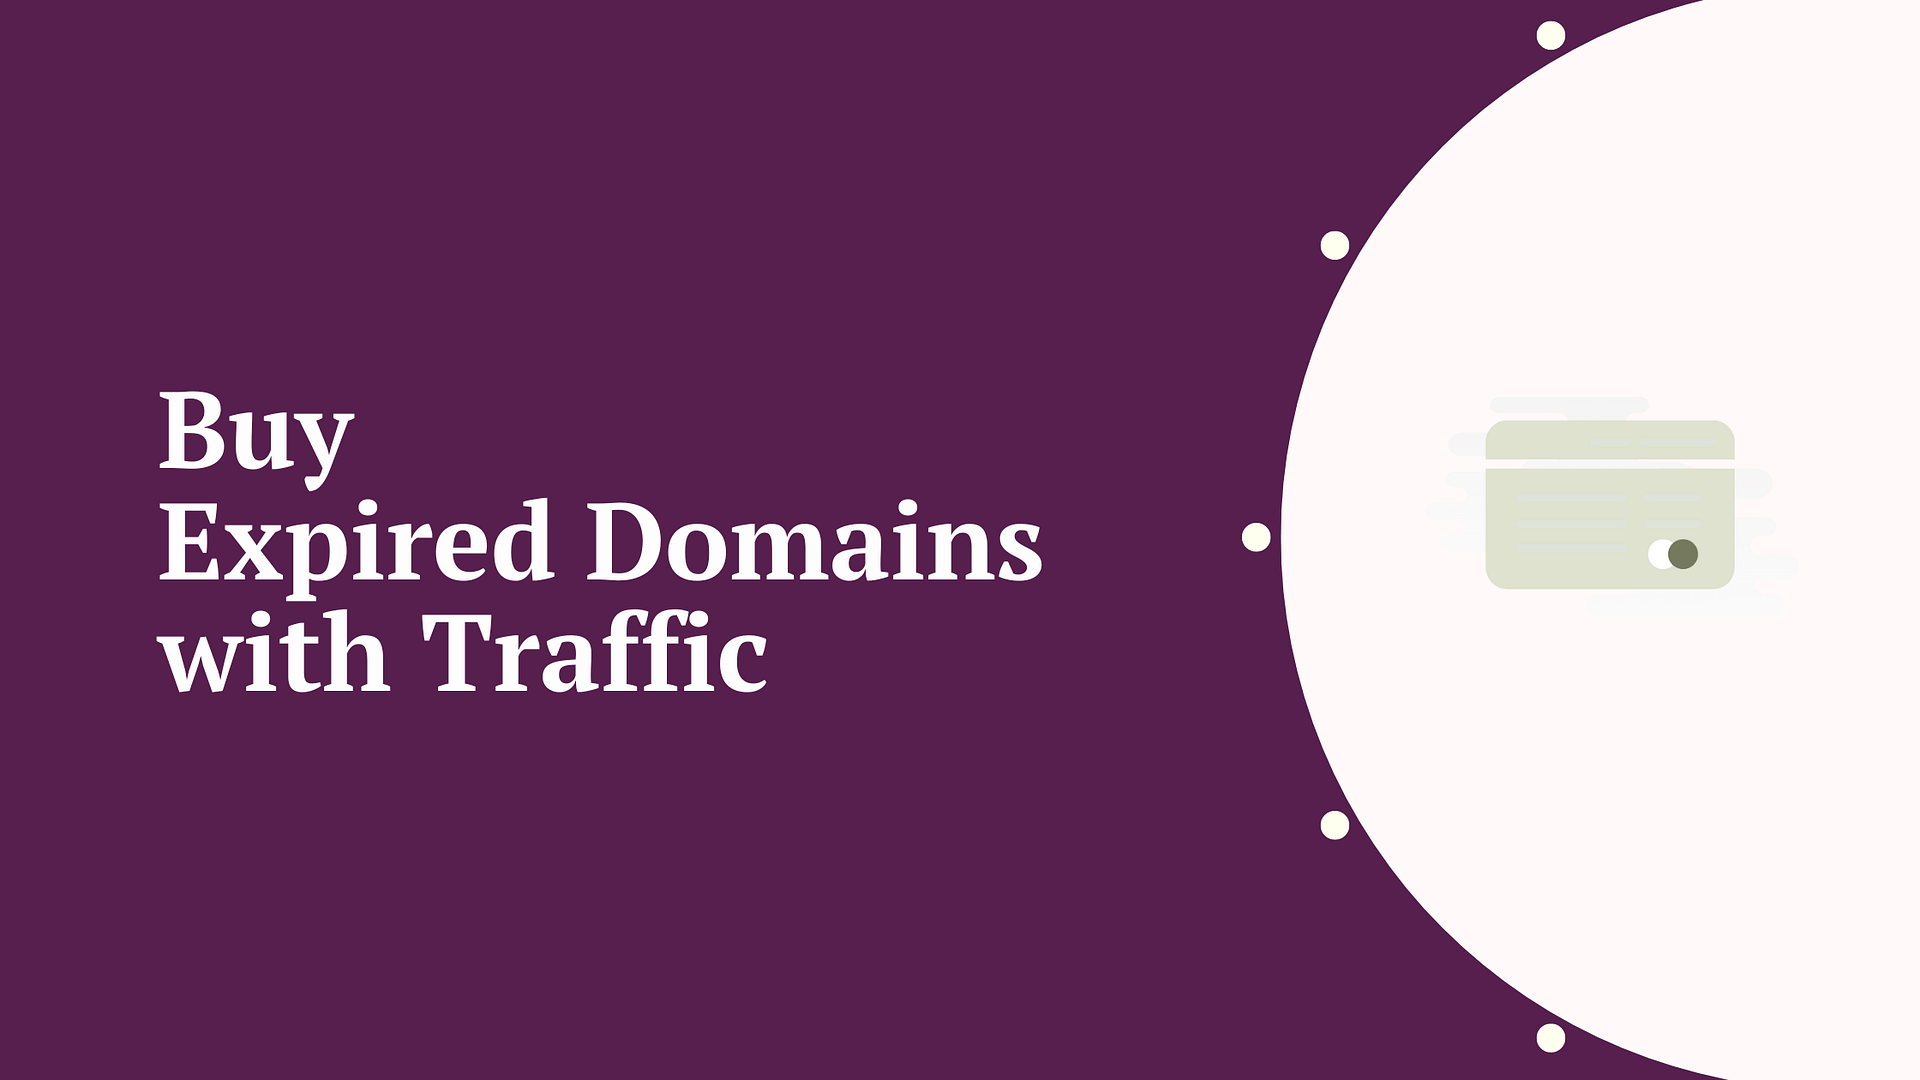 Buy expired domains with traffic.